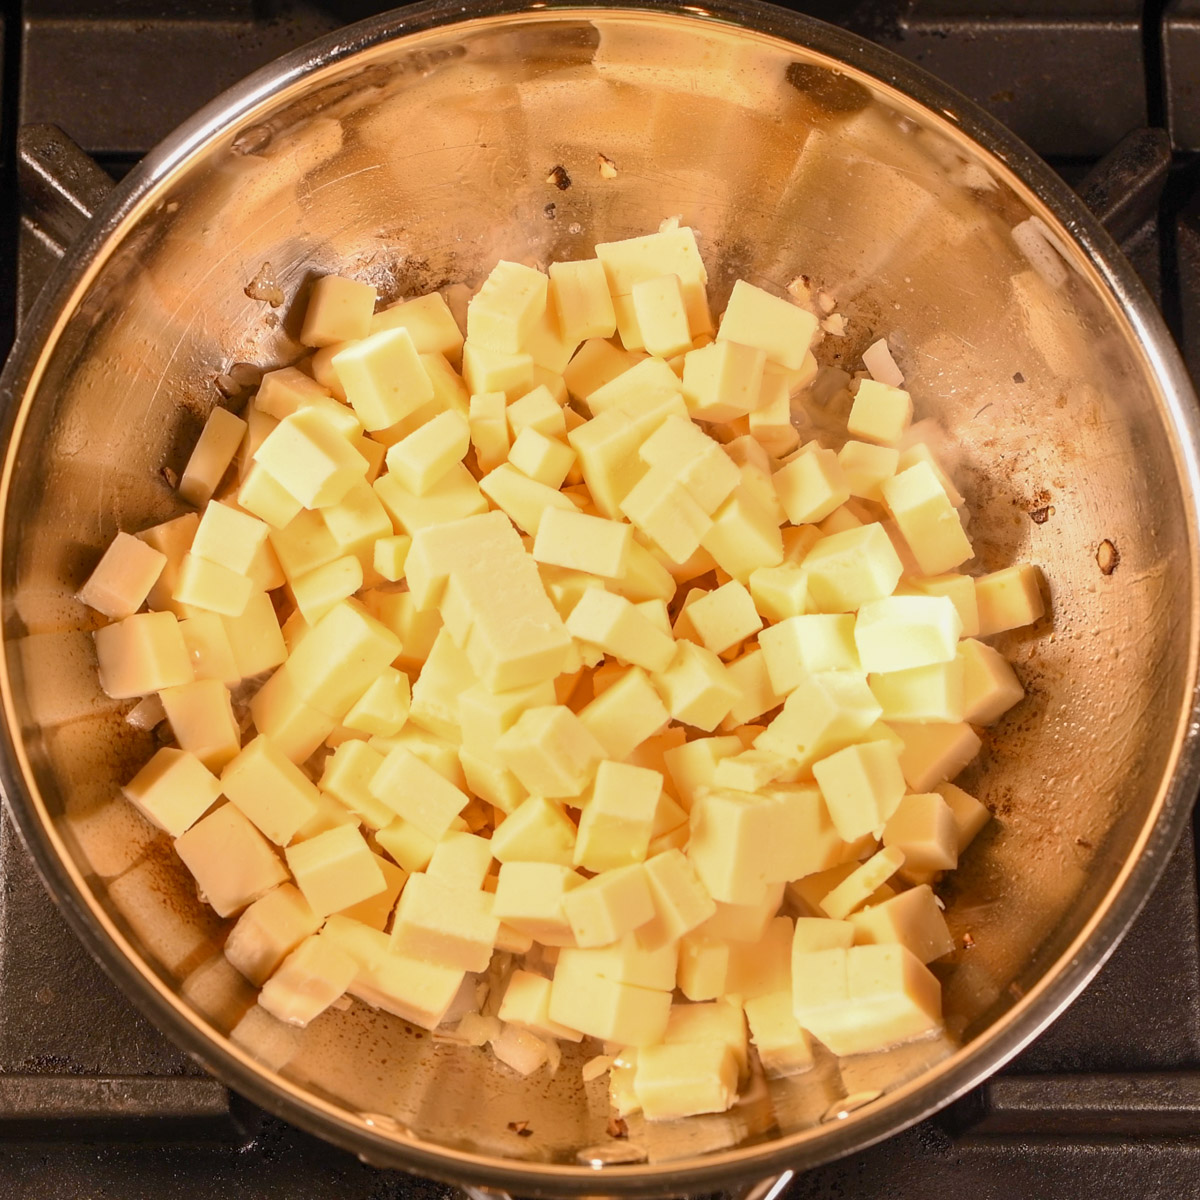 Add cubed American cheese to the onion and garlic mixture.